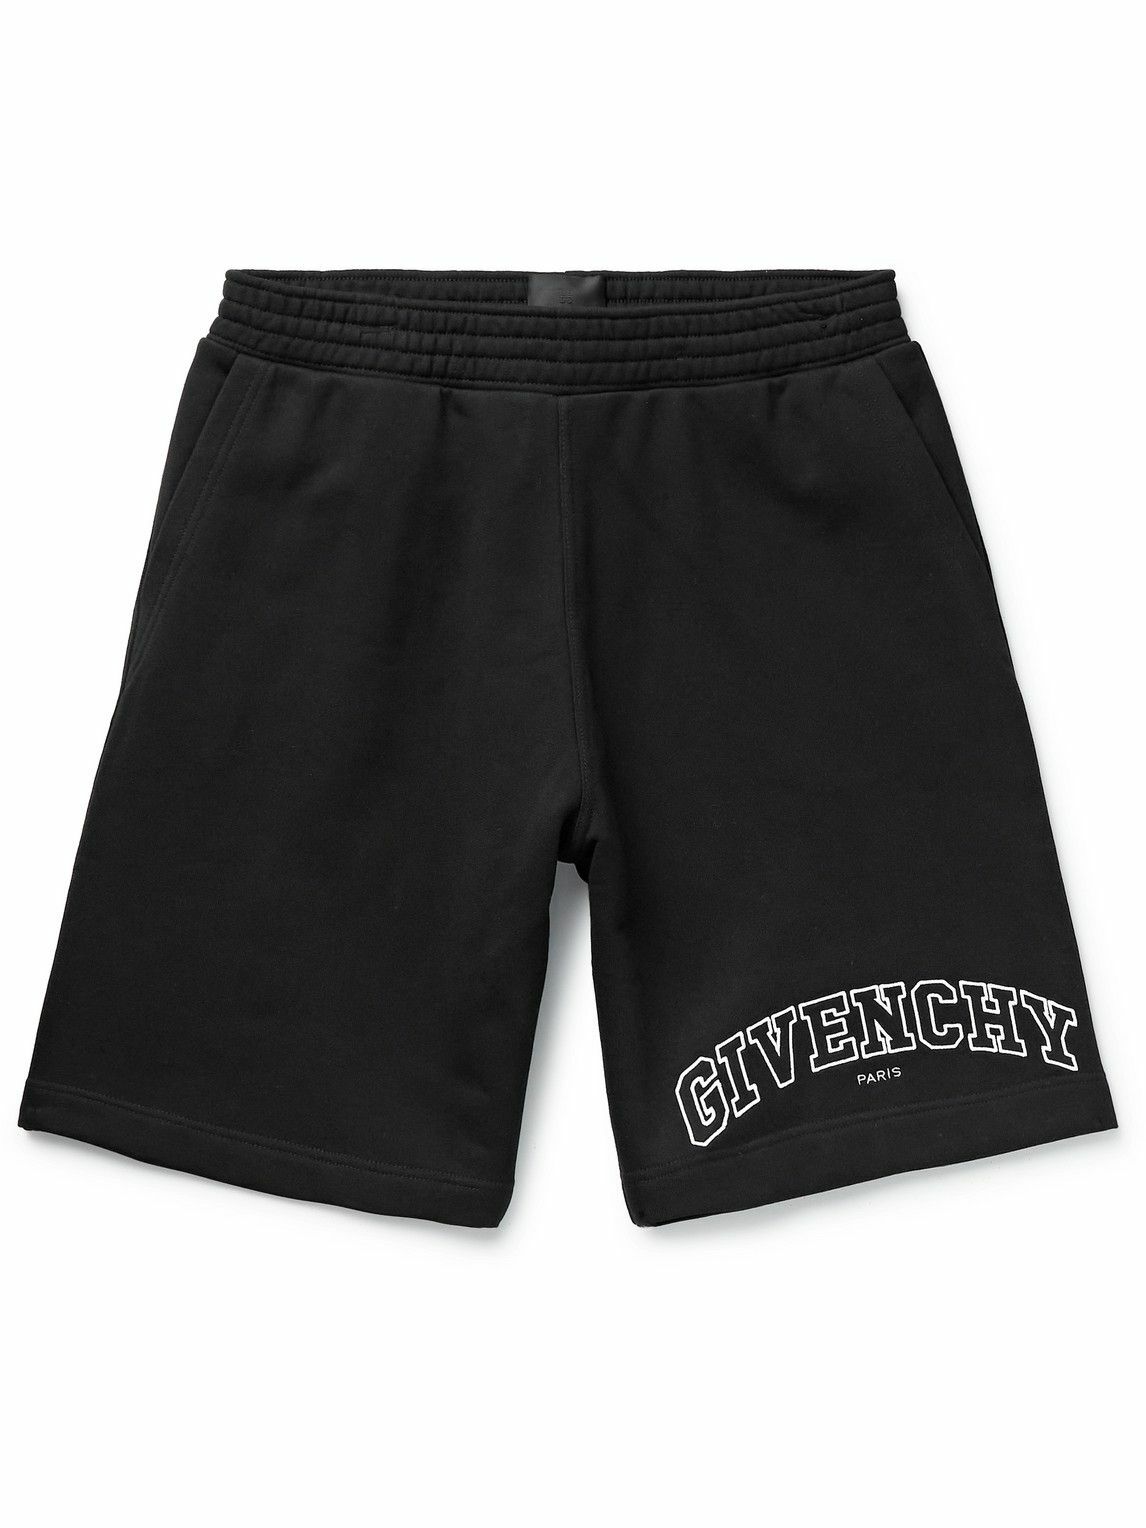 Givenchy - Logo-Embroidered Cotton-Jersey Shorts - Black Givenchy